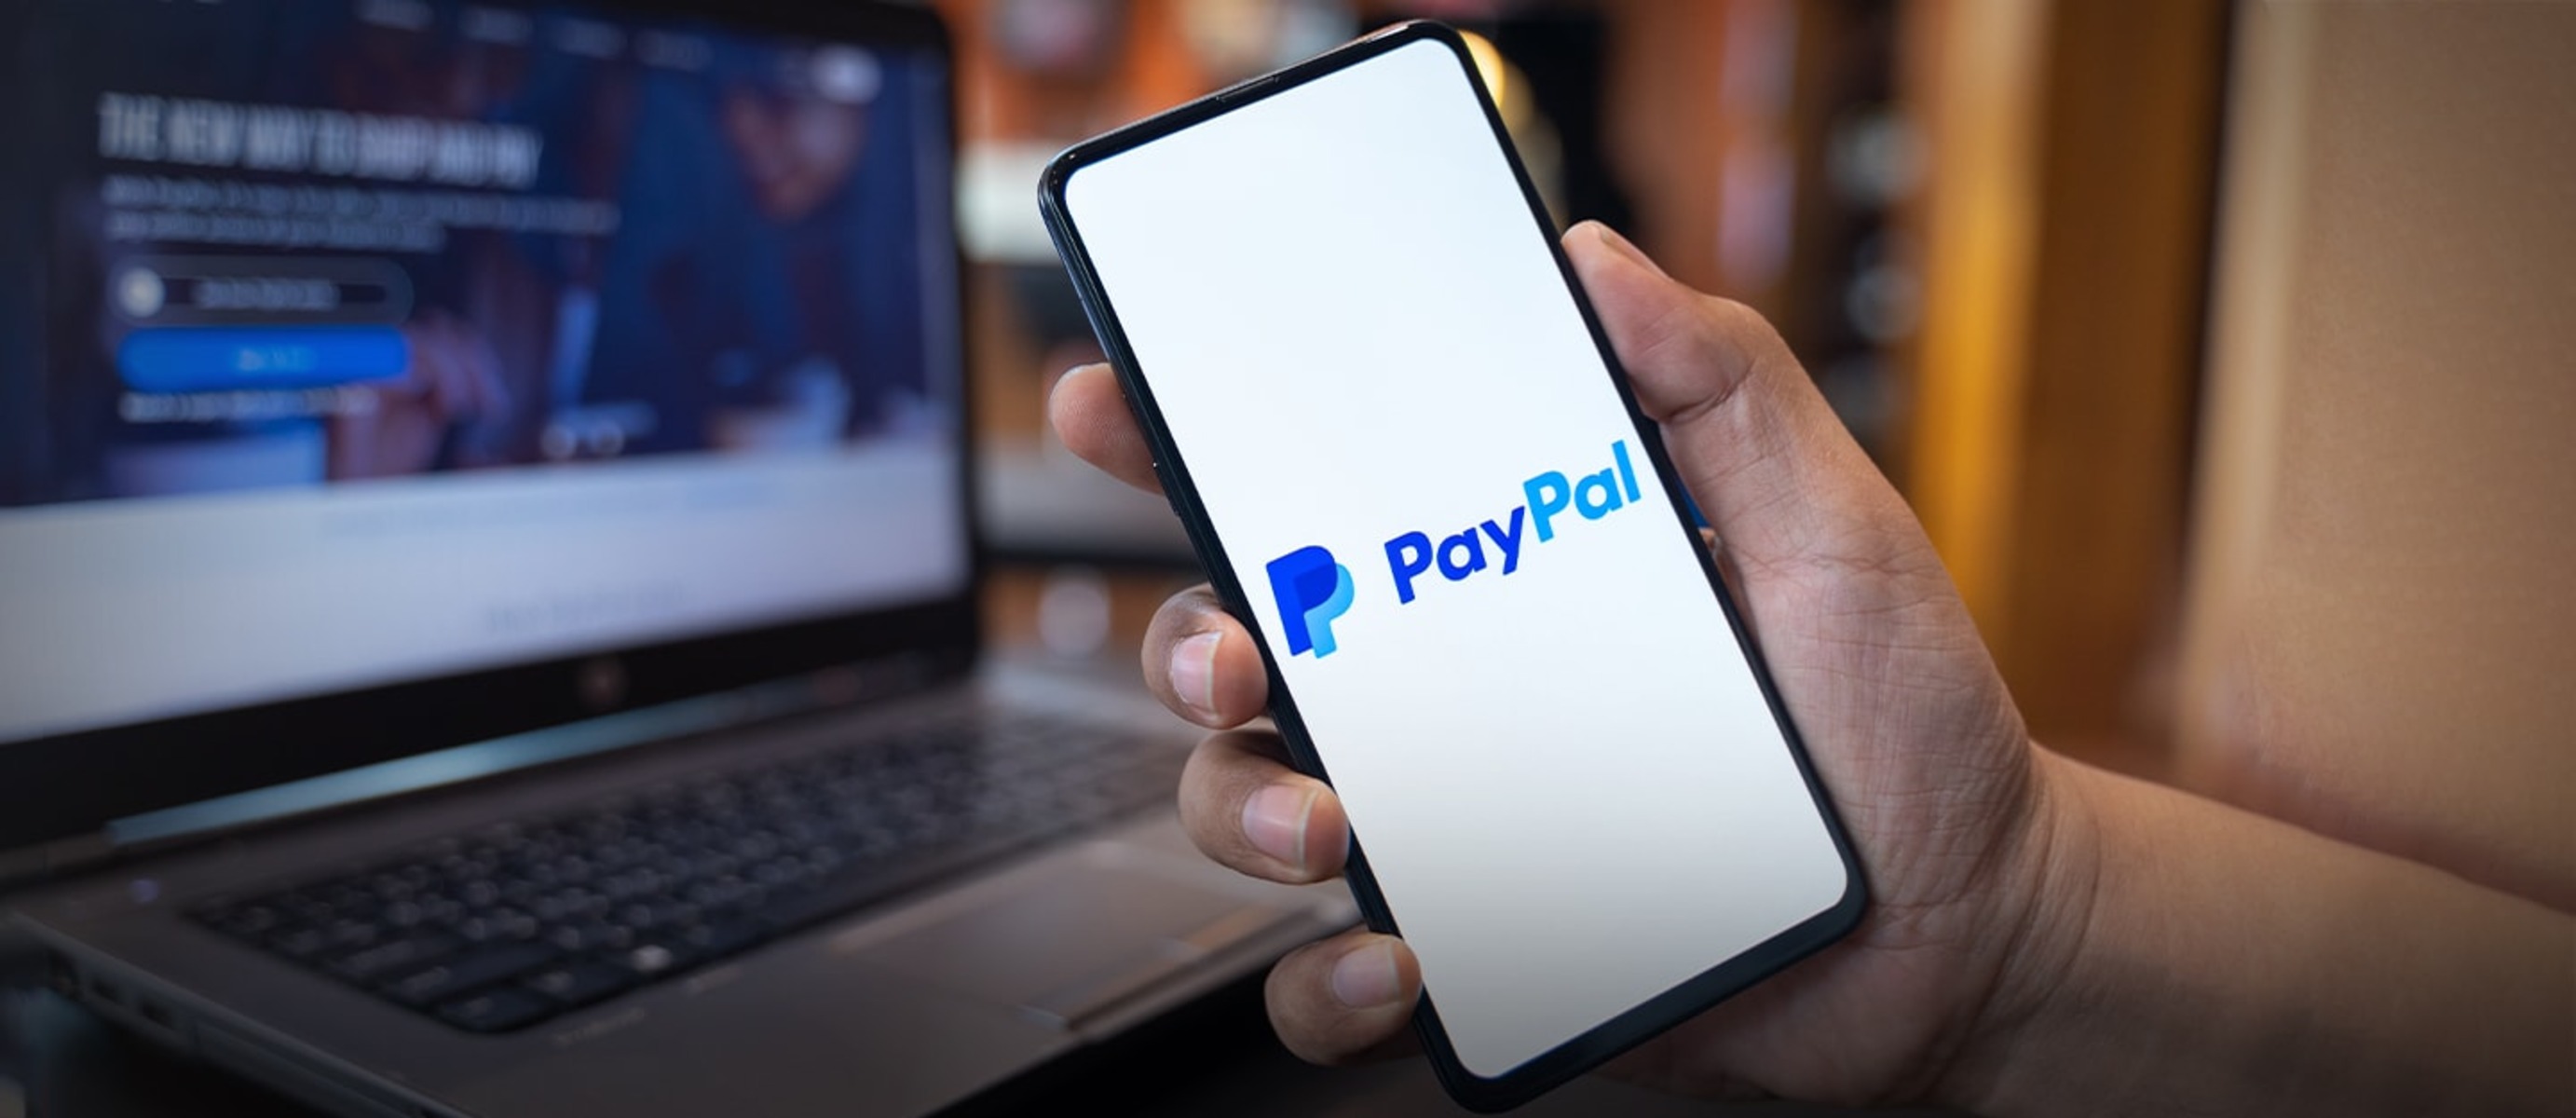 What Money Transfer Is Faster Through Paypal